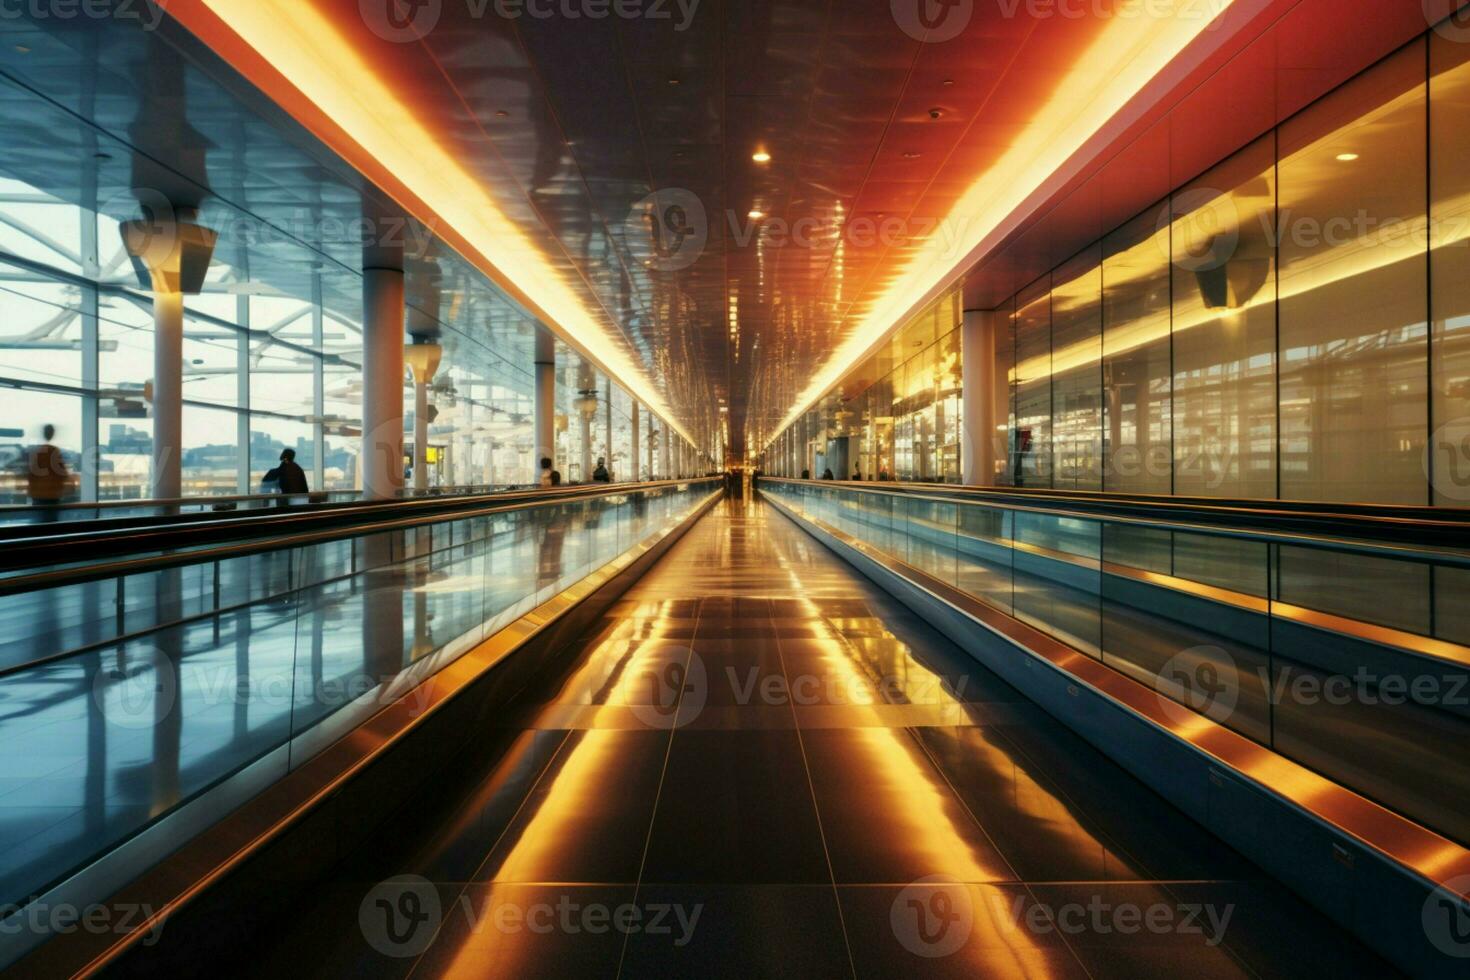 The airport's dynamic flow blurred travelers on parallel moving walkways, a straight path AI Generated photo